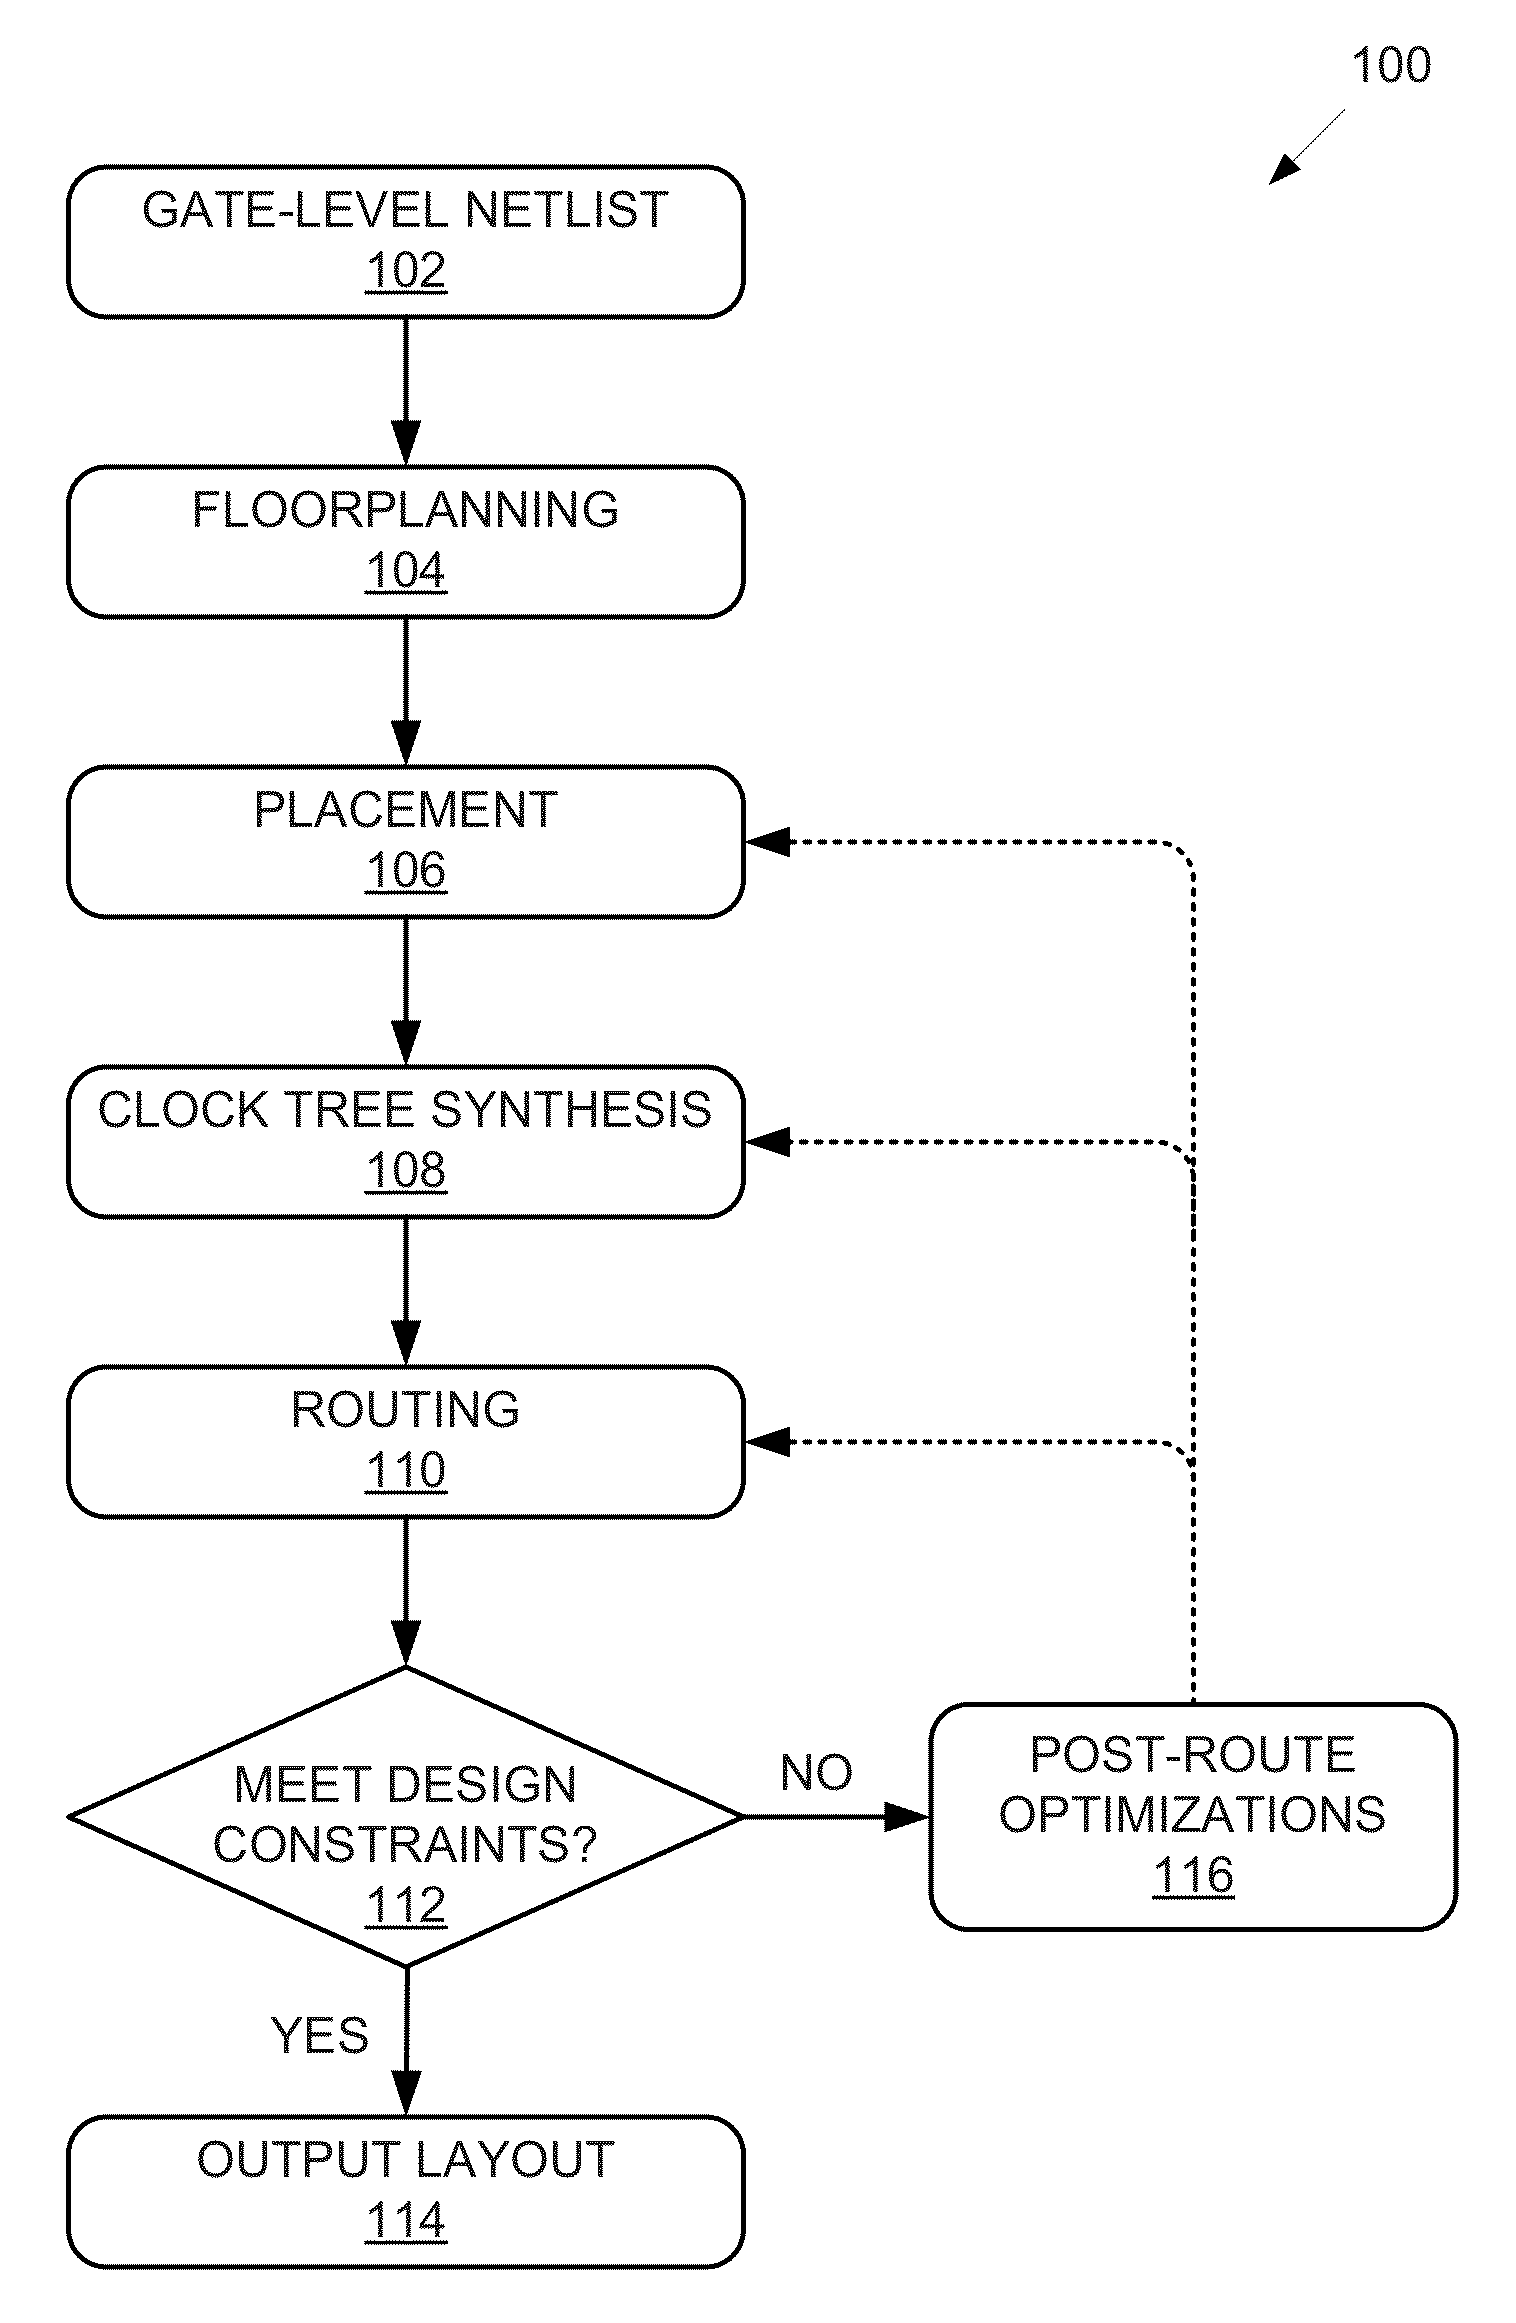 Generating pattern-based estimated RC data with analysis of route information